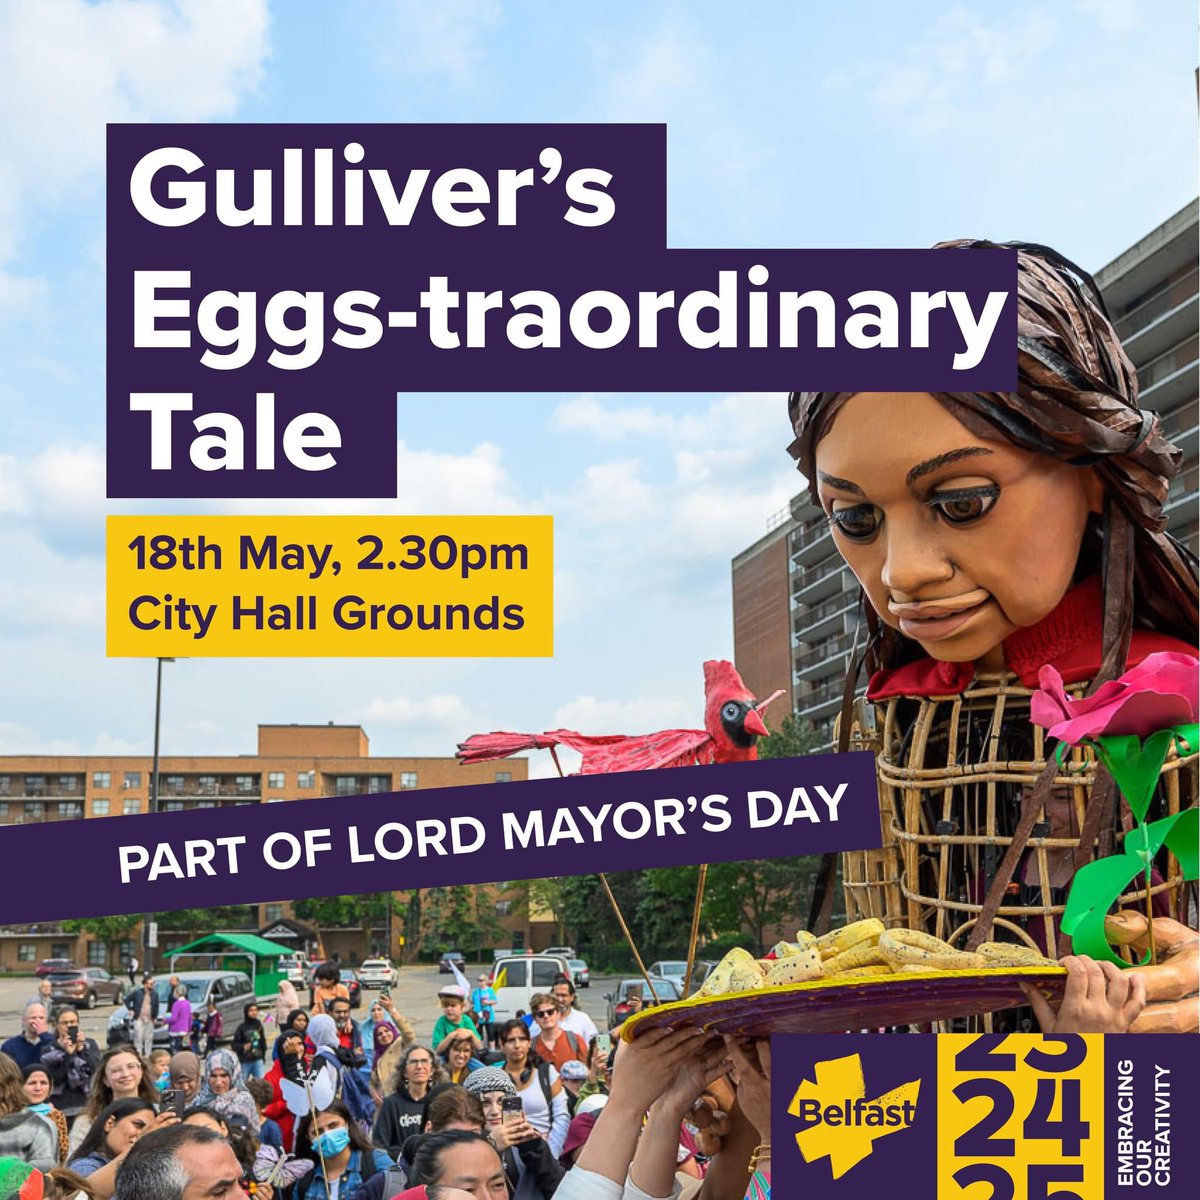 Gulliver’s Eggs-traordinary Tale! 🎪 Amal is greeted by the Lord Mayor of Belfast at City Hall as he celebrates his term in office. They take part in Amal in a special performance inspired by Gulliver’s Travels. It’s the annual Egg festival, who will you be cheering for, the…